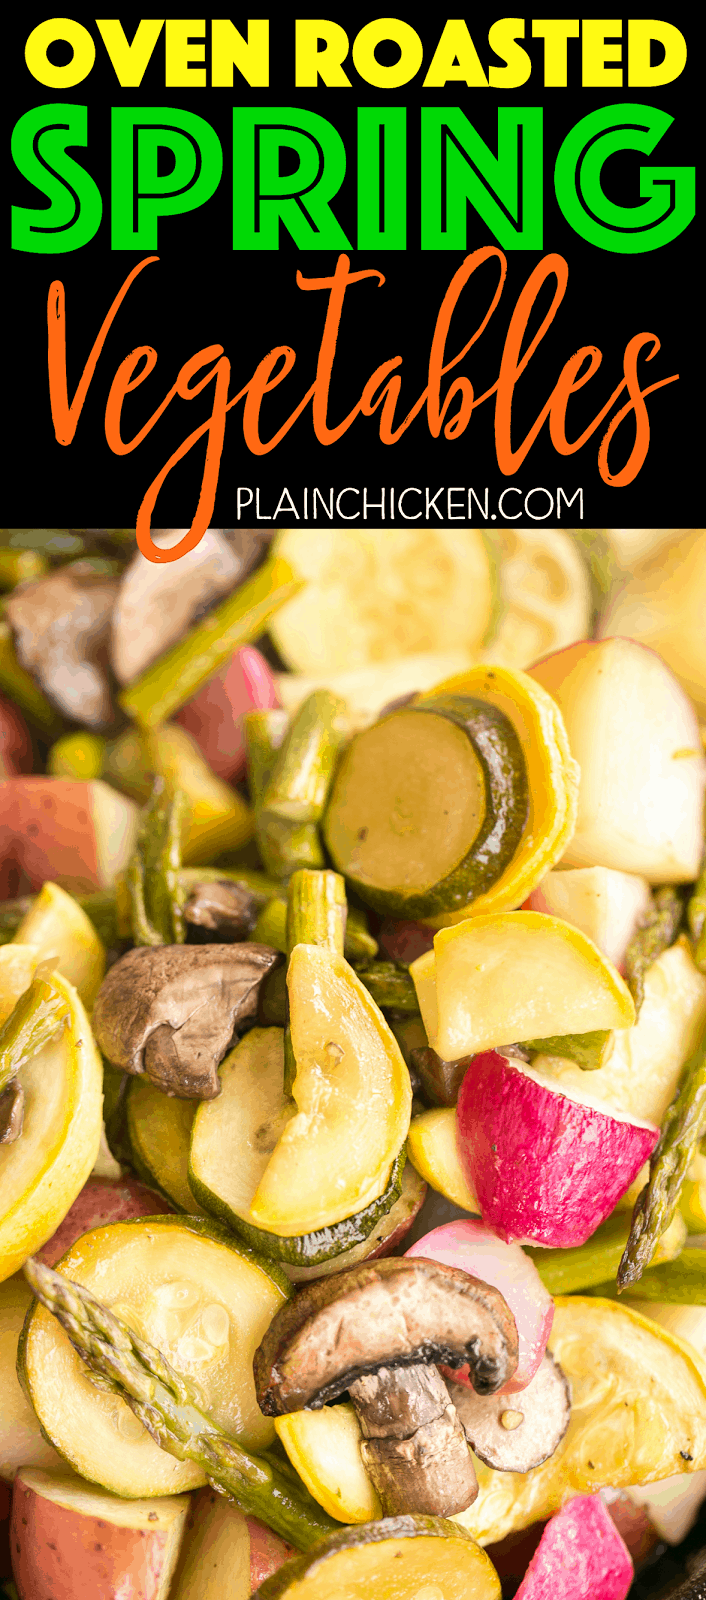 Oven Roasted Spring Vegetables - potatoes, asparagus, squash, zucchini, radishes and mushrooms tossed in balsamic vinegar and brown sugar. Something for everyone!! Such and EASY side dish recipe! Just chop, toss and bake. Ready in about 35 minutes. Everyone LOVES this dish! Great with grilled chicken, pork and steak.